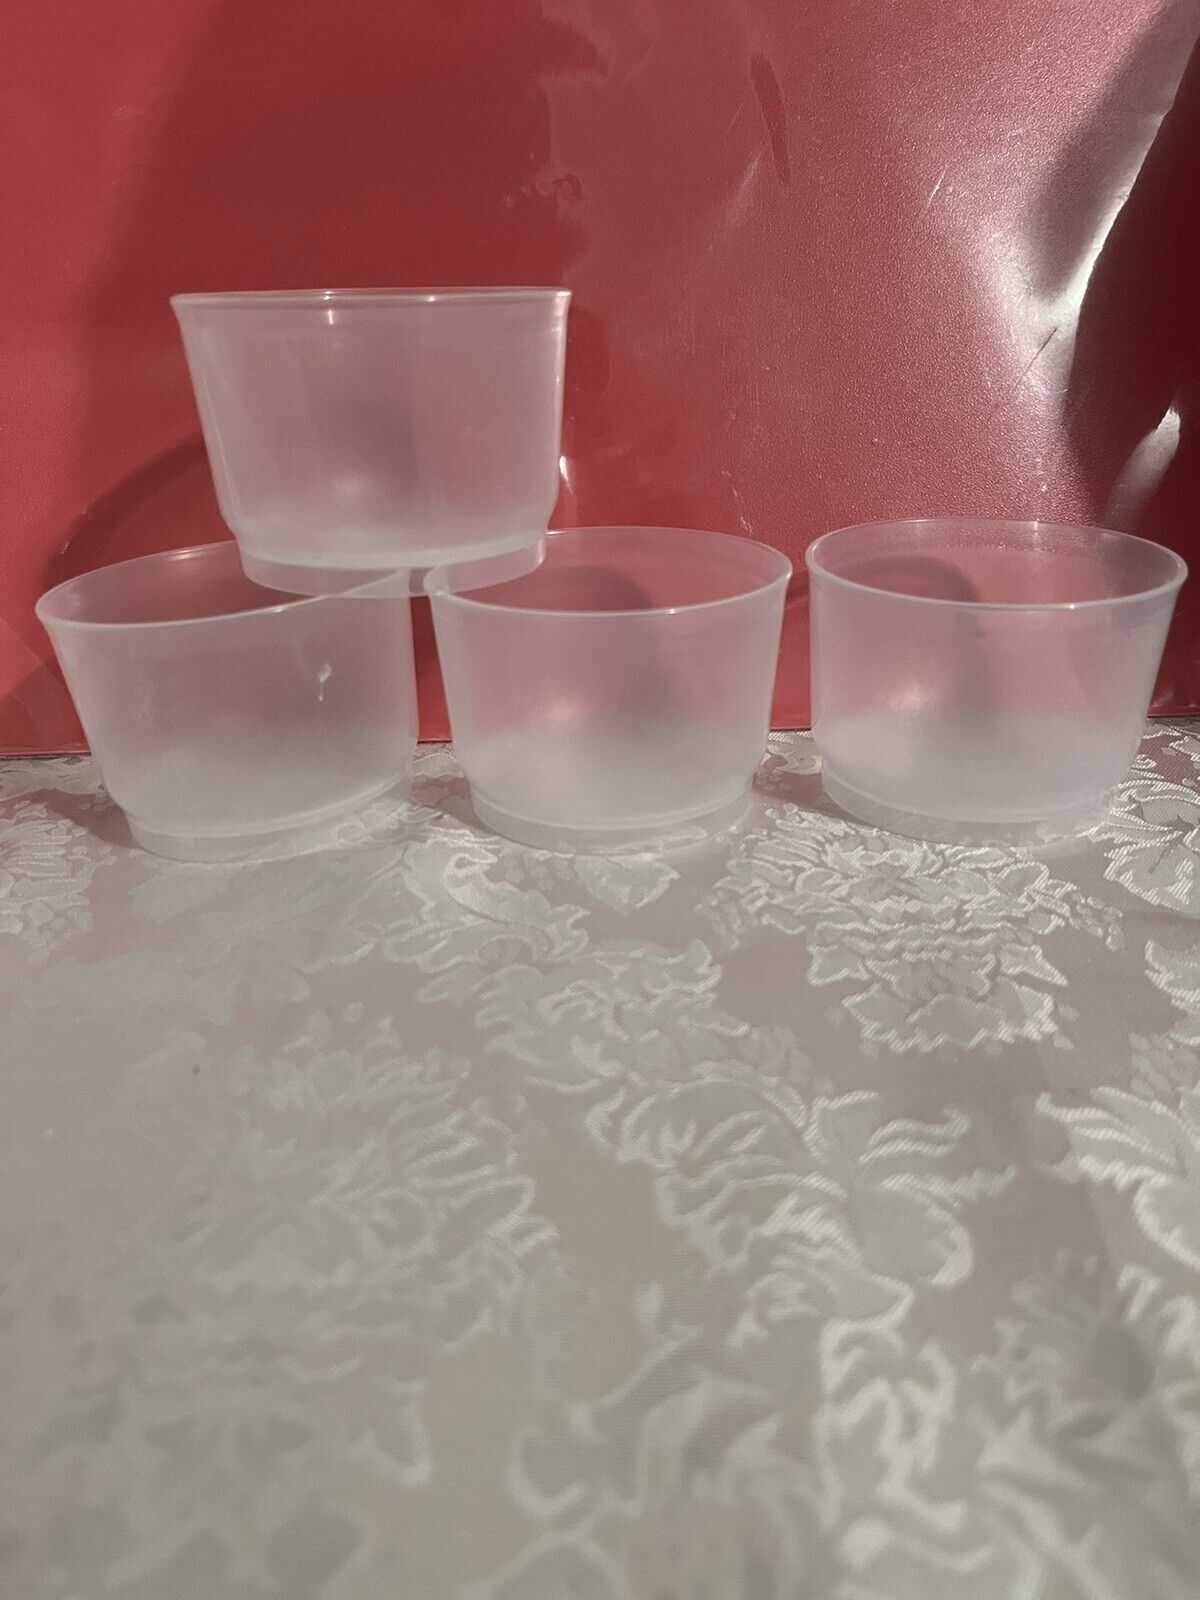 Tupperware Set Of 4 Snack Cups Clear Bowls NO SEALS. Brand New Great Storage